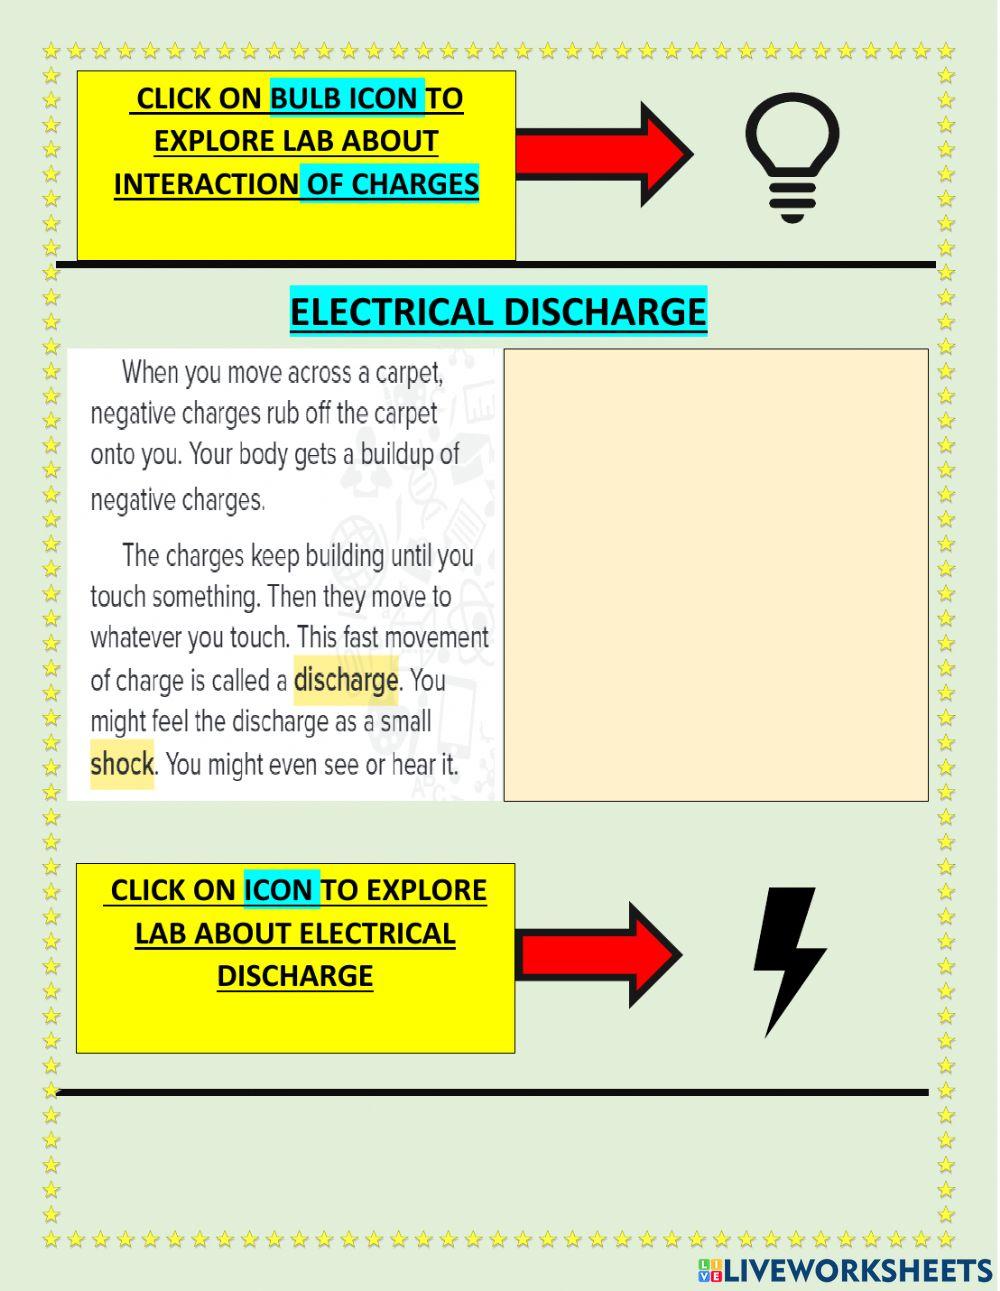 Chapter 7 lesson 4 ELECTRICITY PART 1